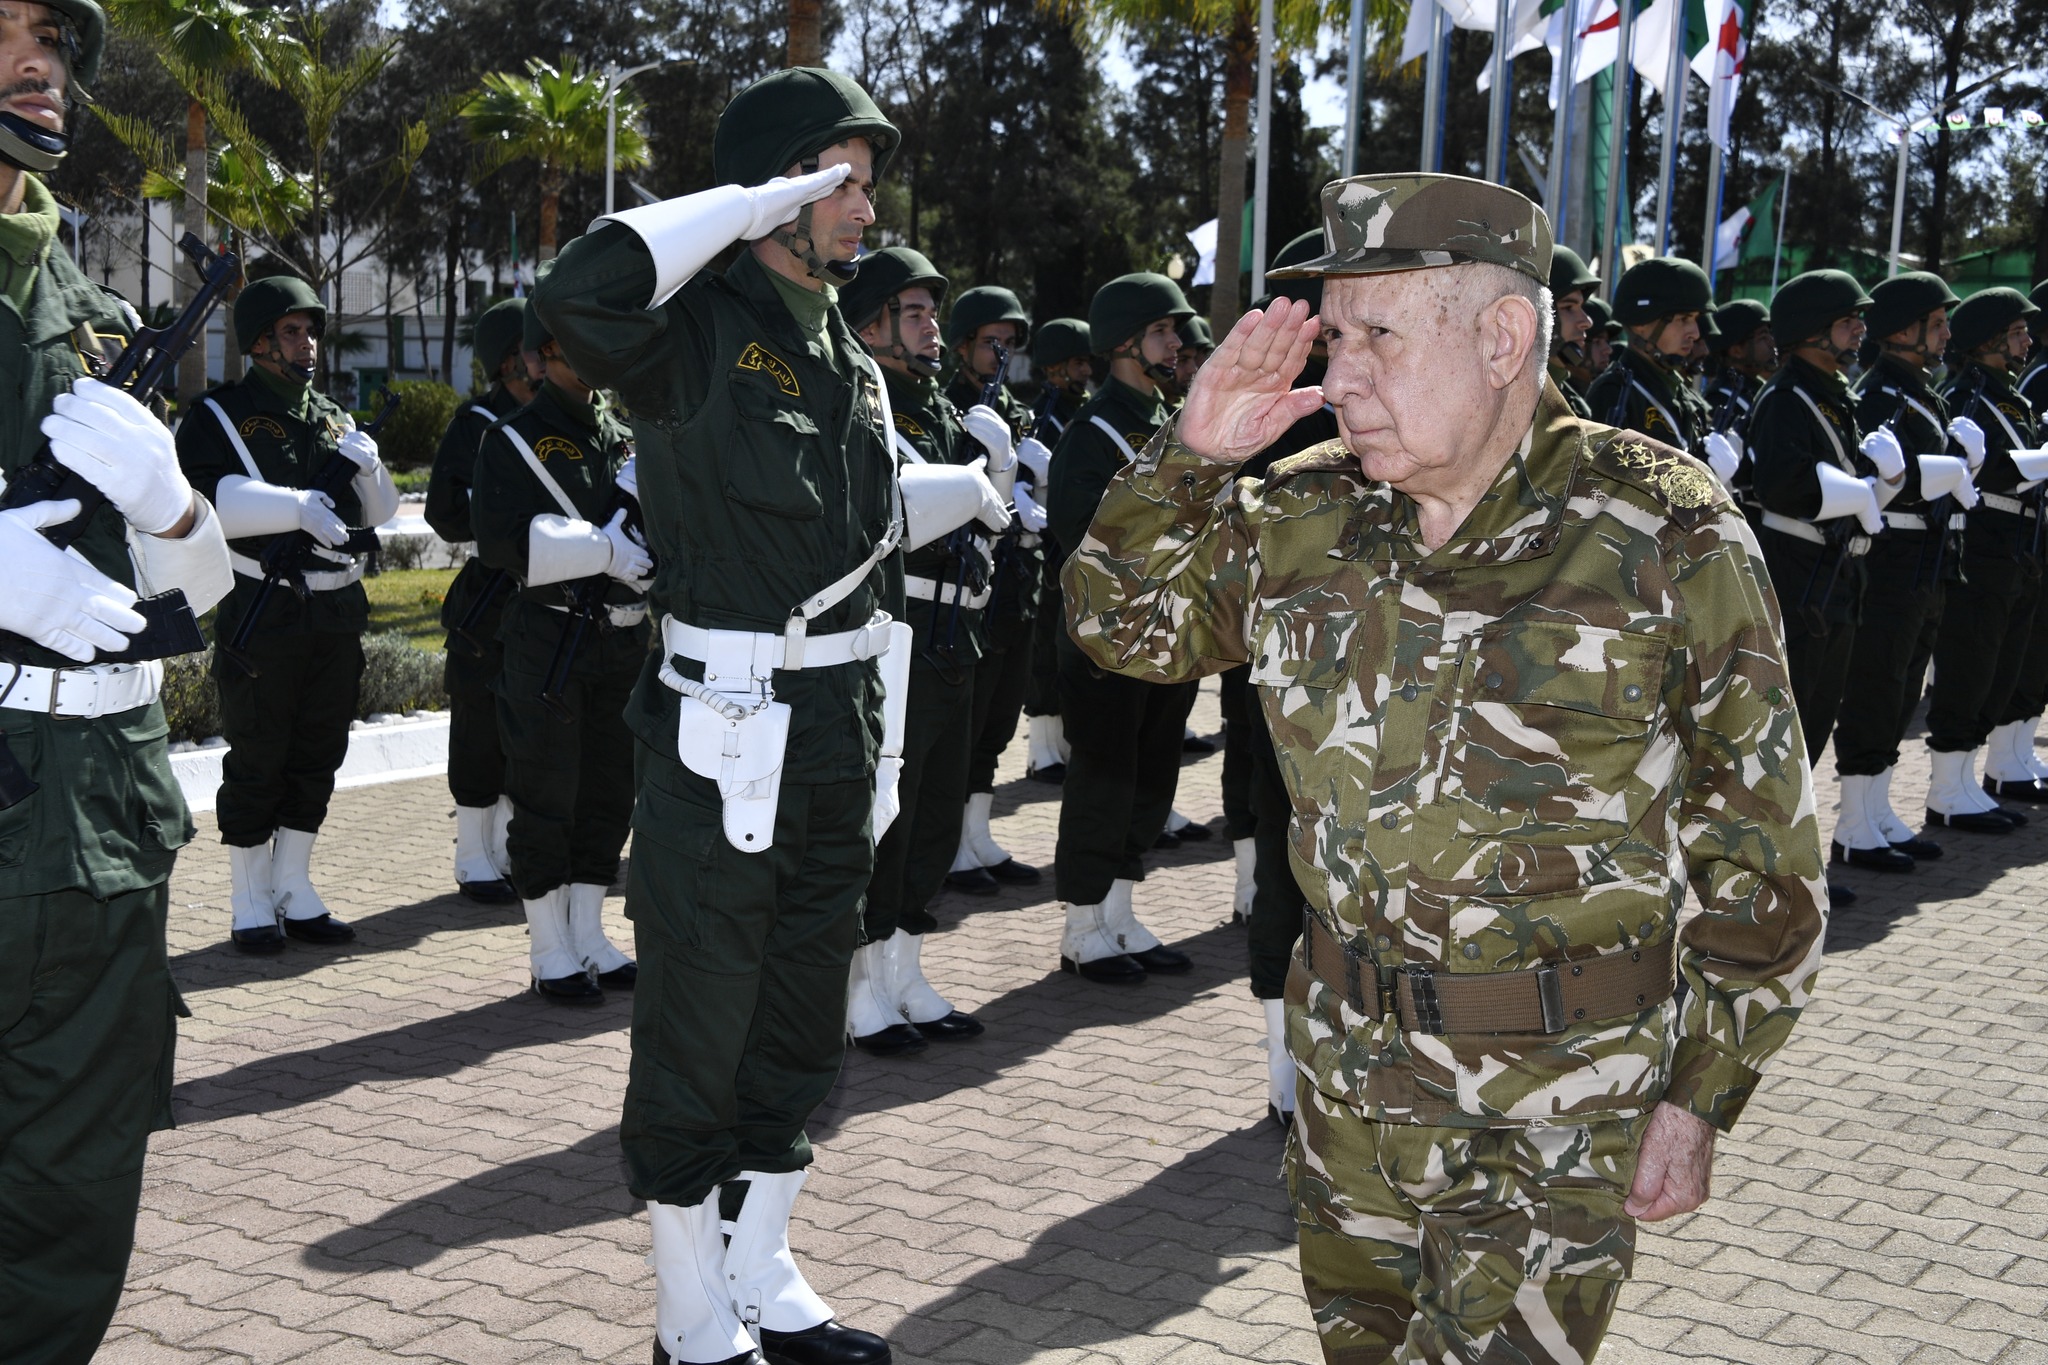 Lieutenant General Chengriha chairs the steering council of the Higher Military School - New Algeria